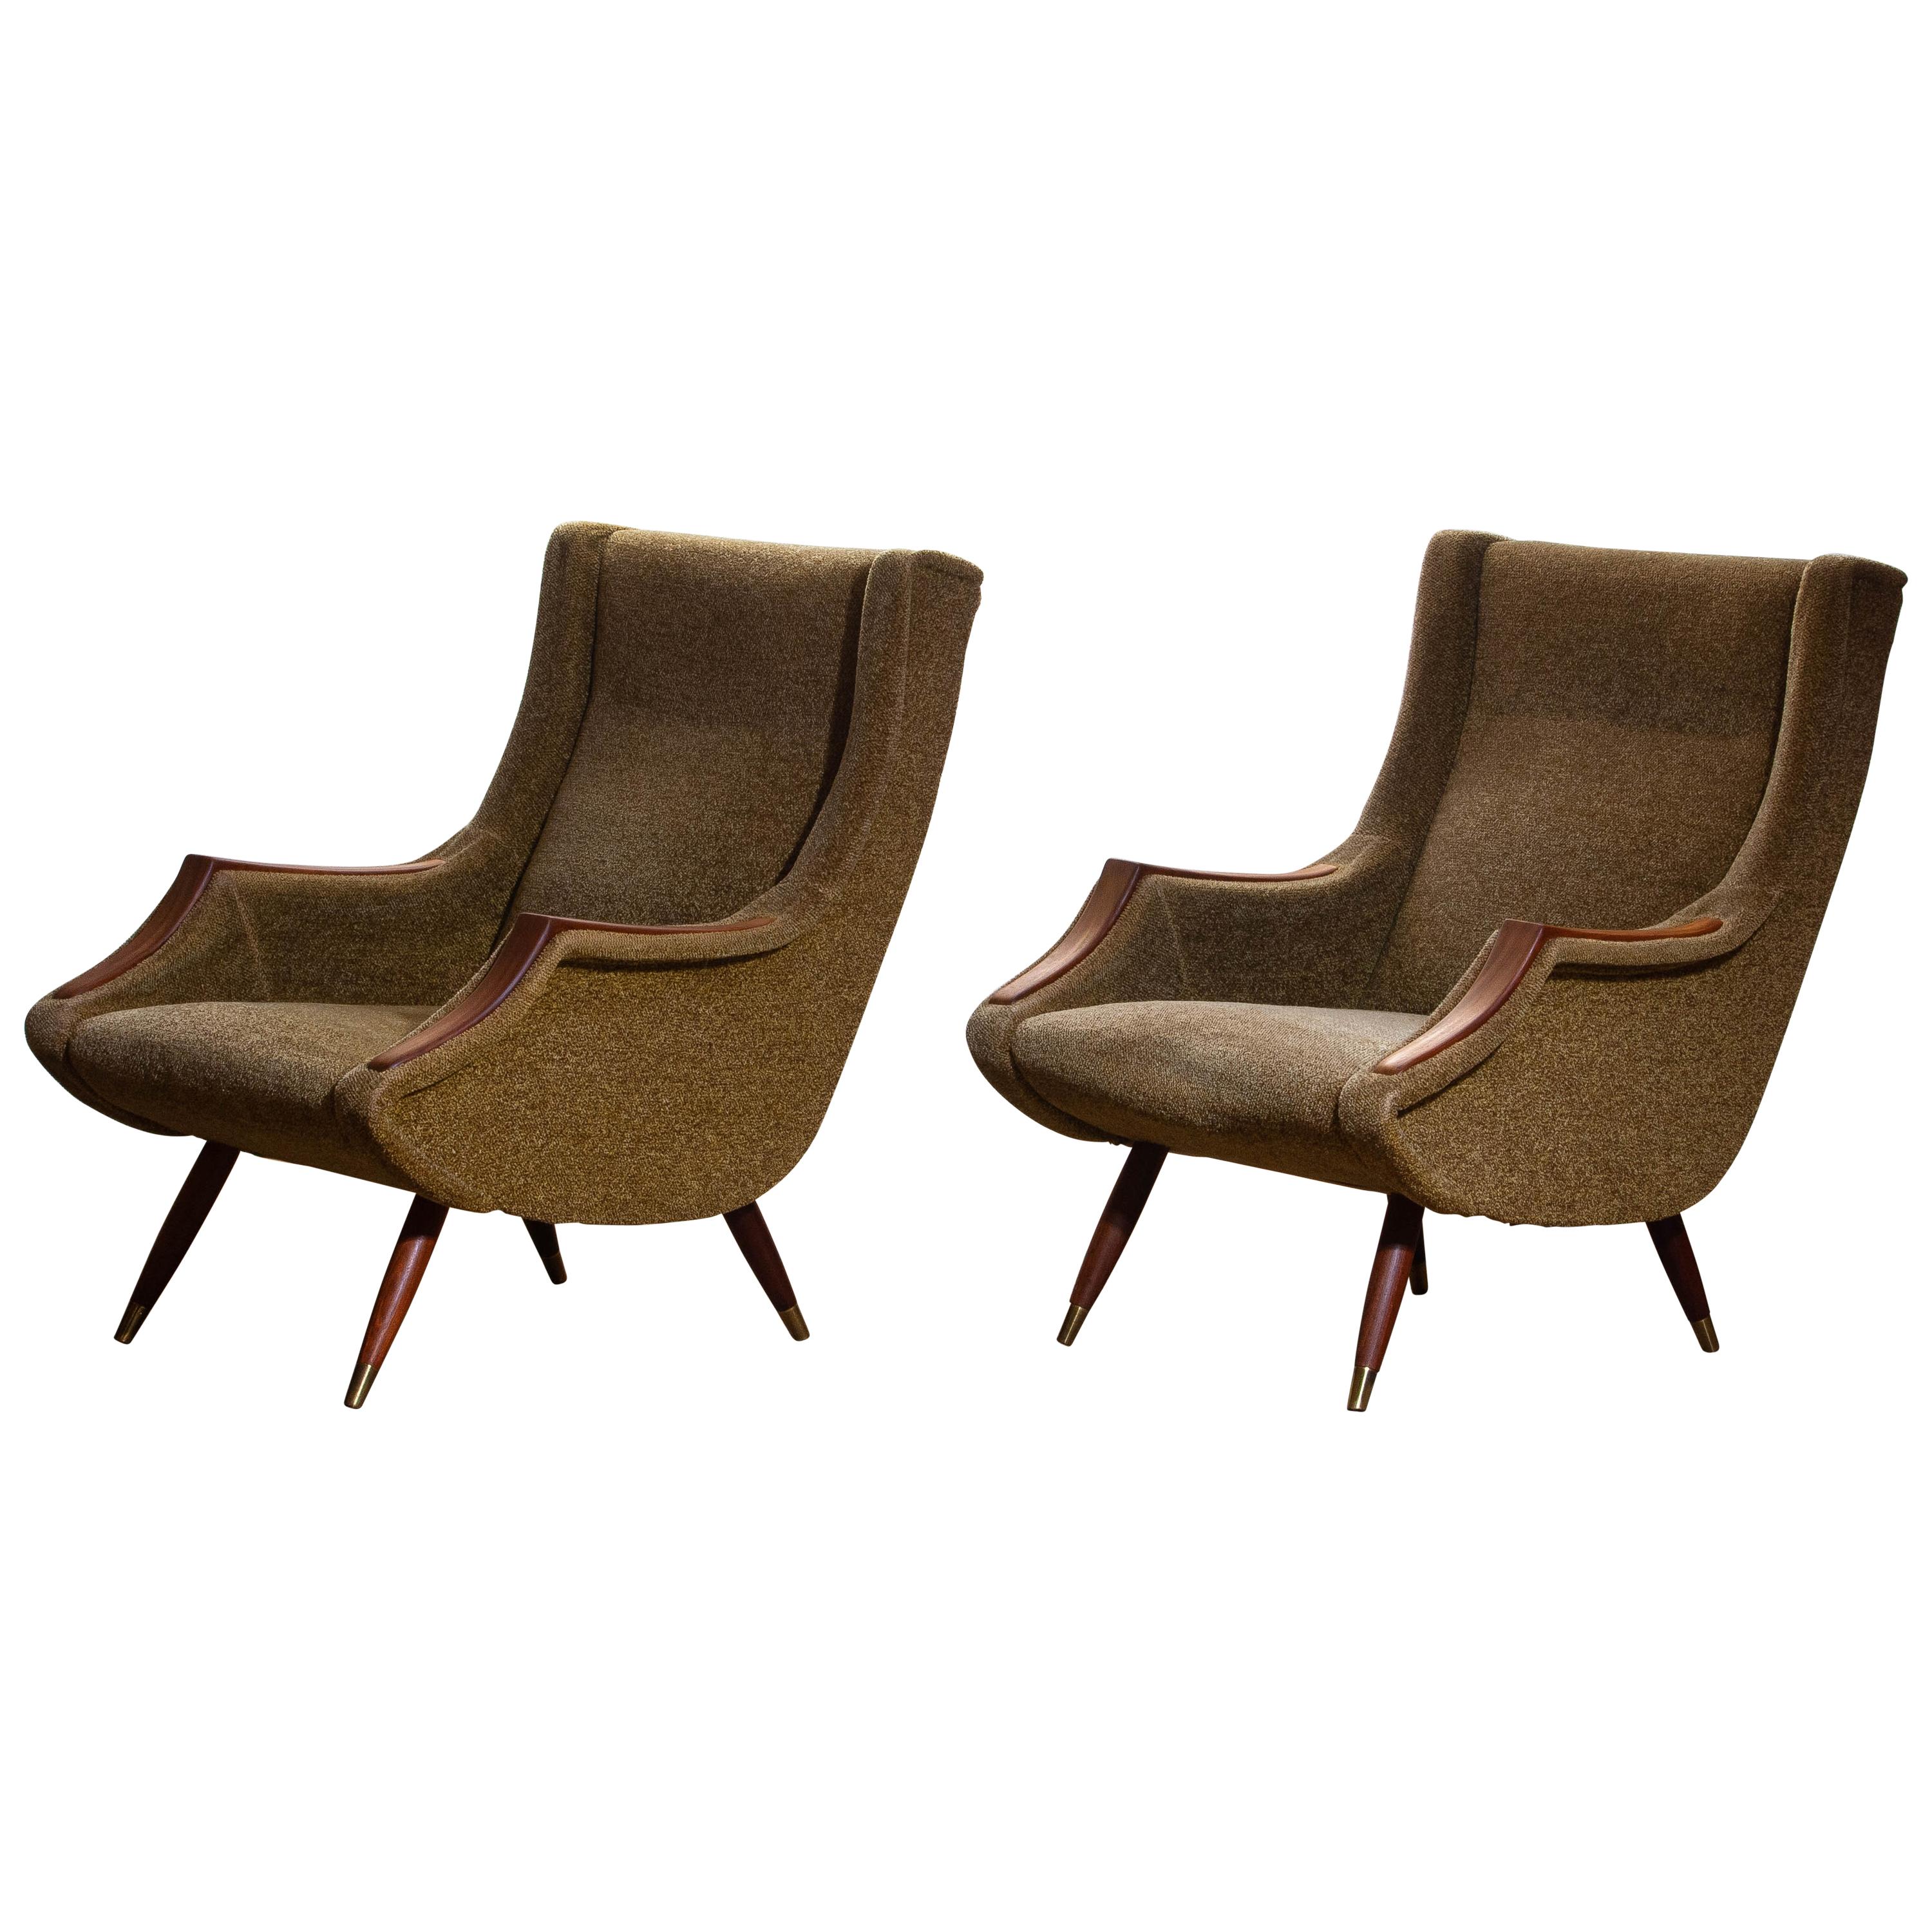 Mid-Century Modern Set Italian Lounge / Easy Chairs from the 1950s by Aldo Morbelli for Isa Bergamo